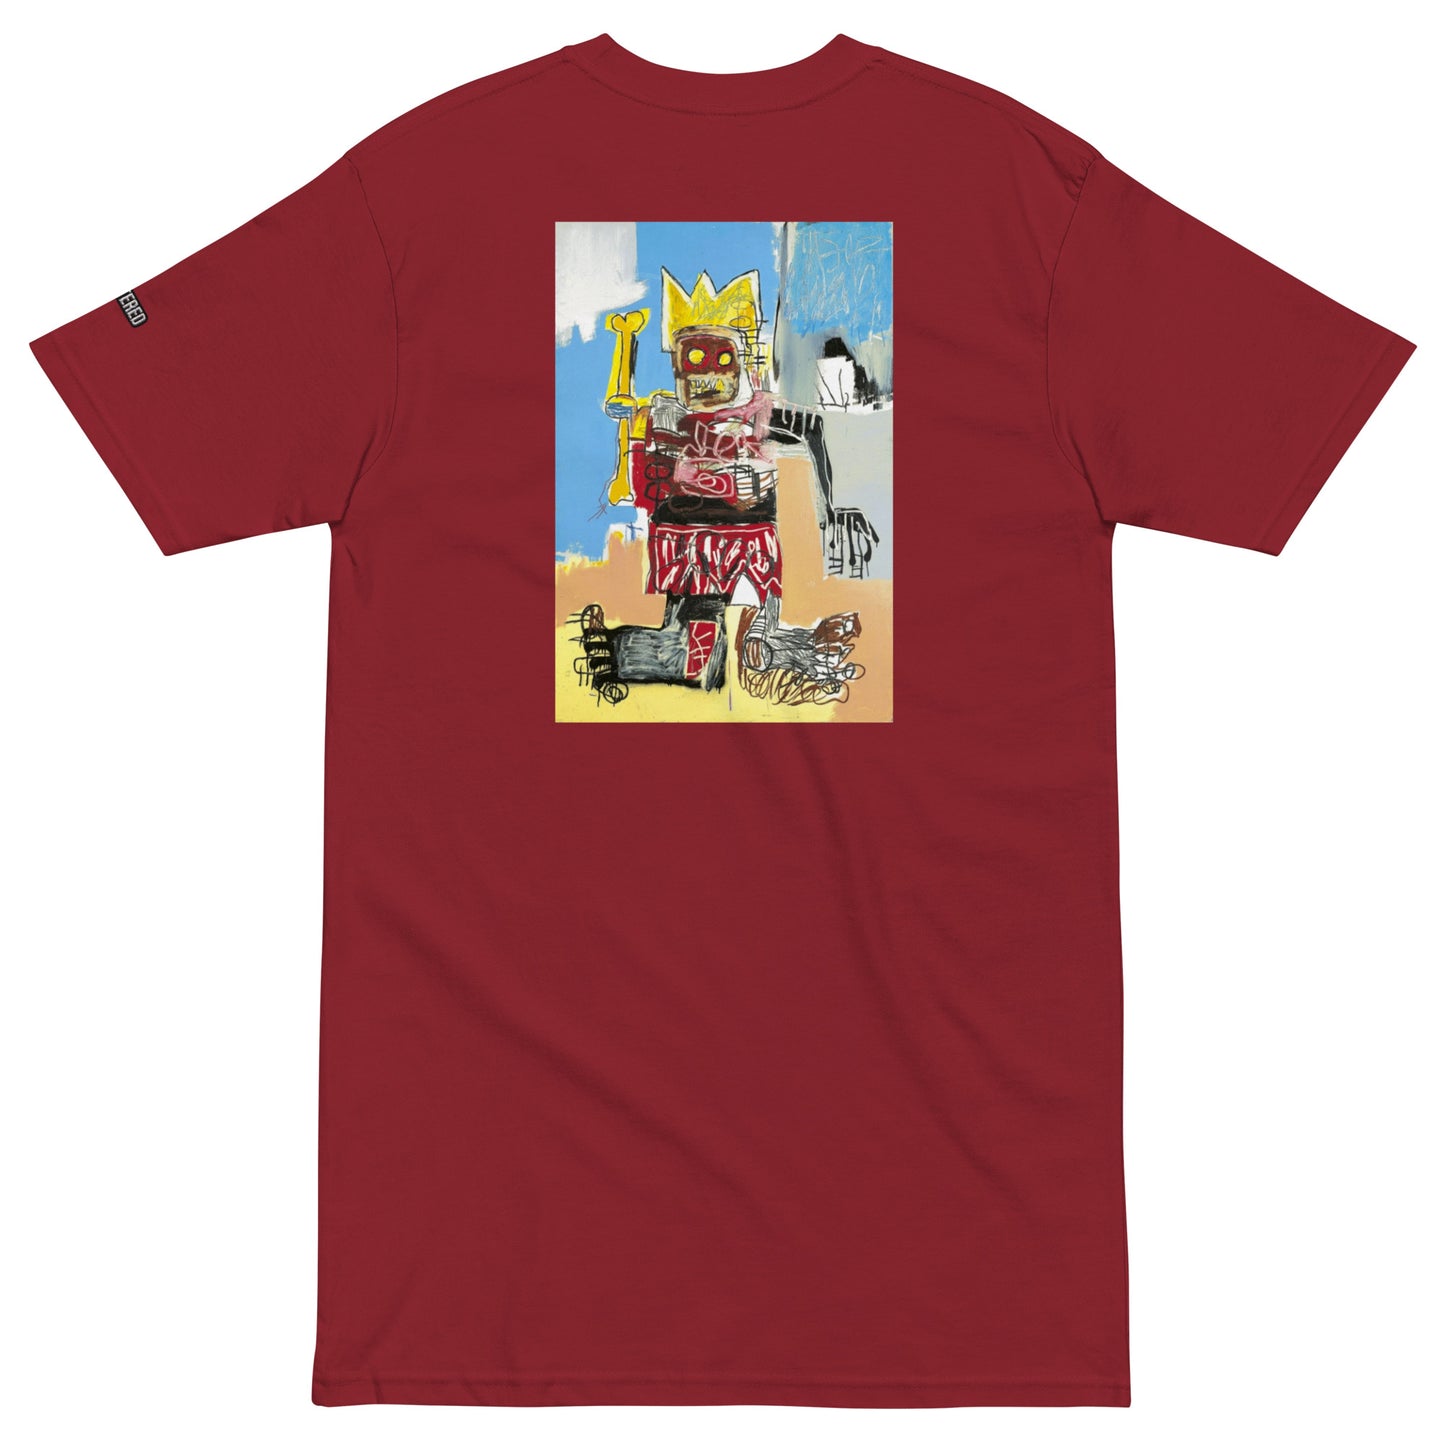 Jean-Michel Basquiat "Untitled" Artwork Embroidered + Printed Premium Red Streetwear T-shirt SCattered